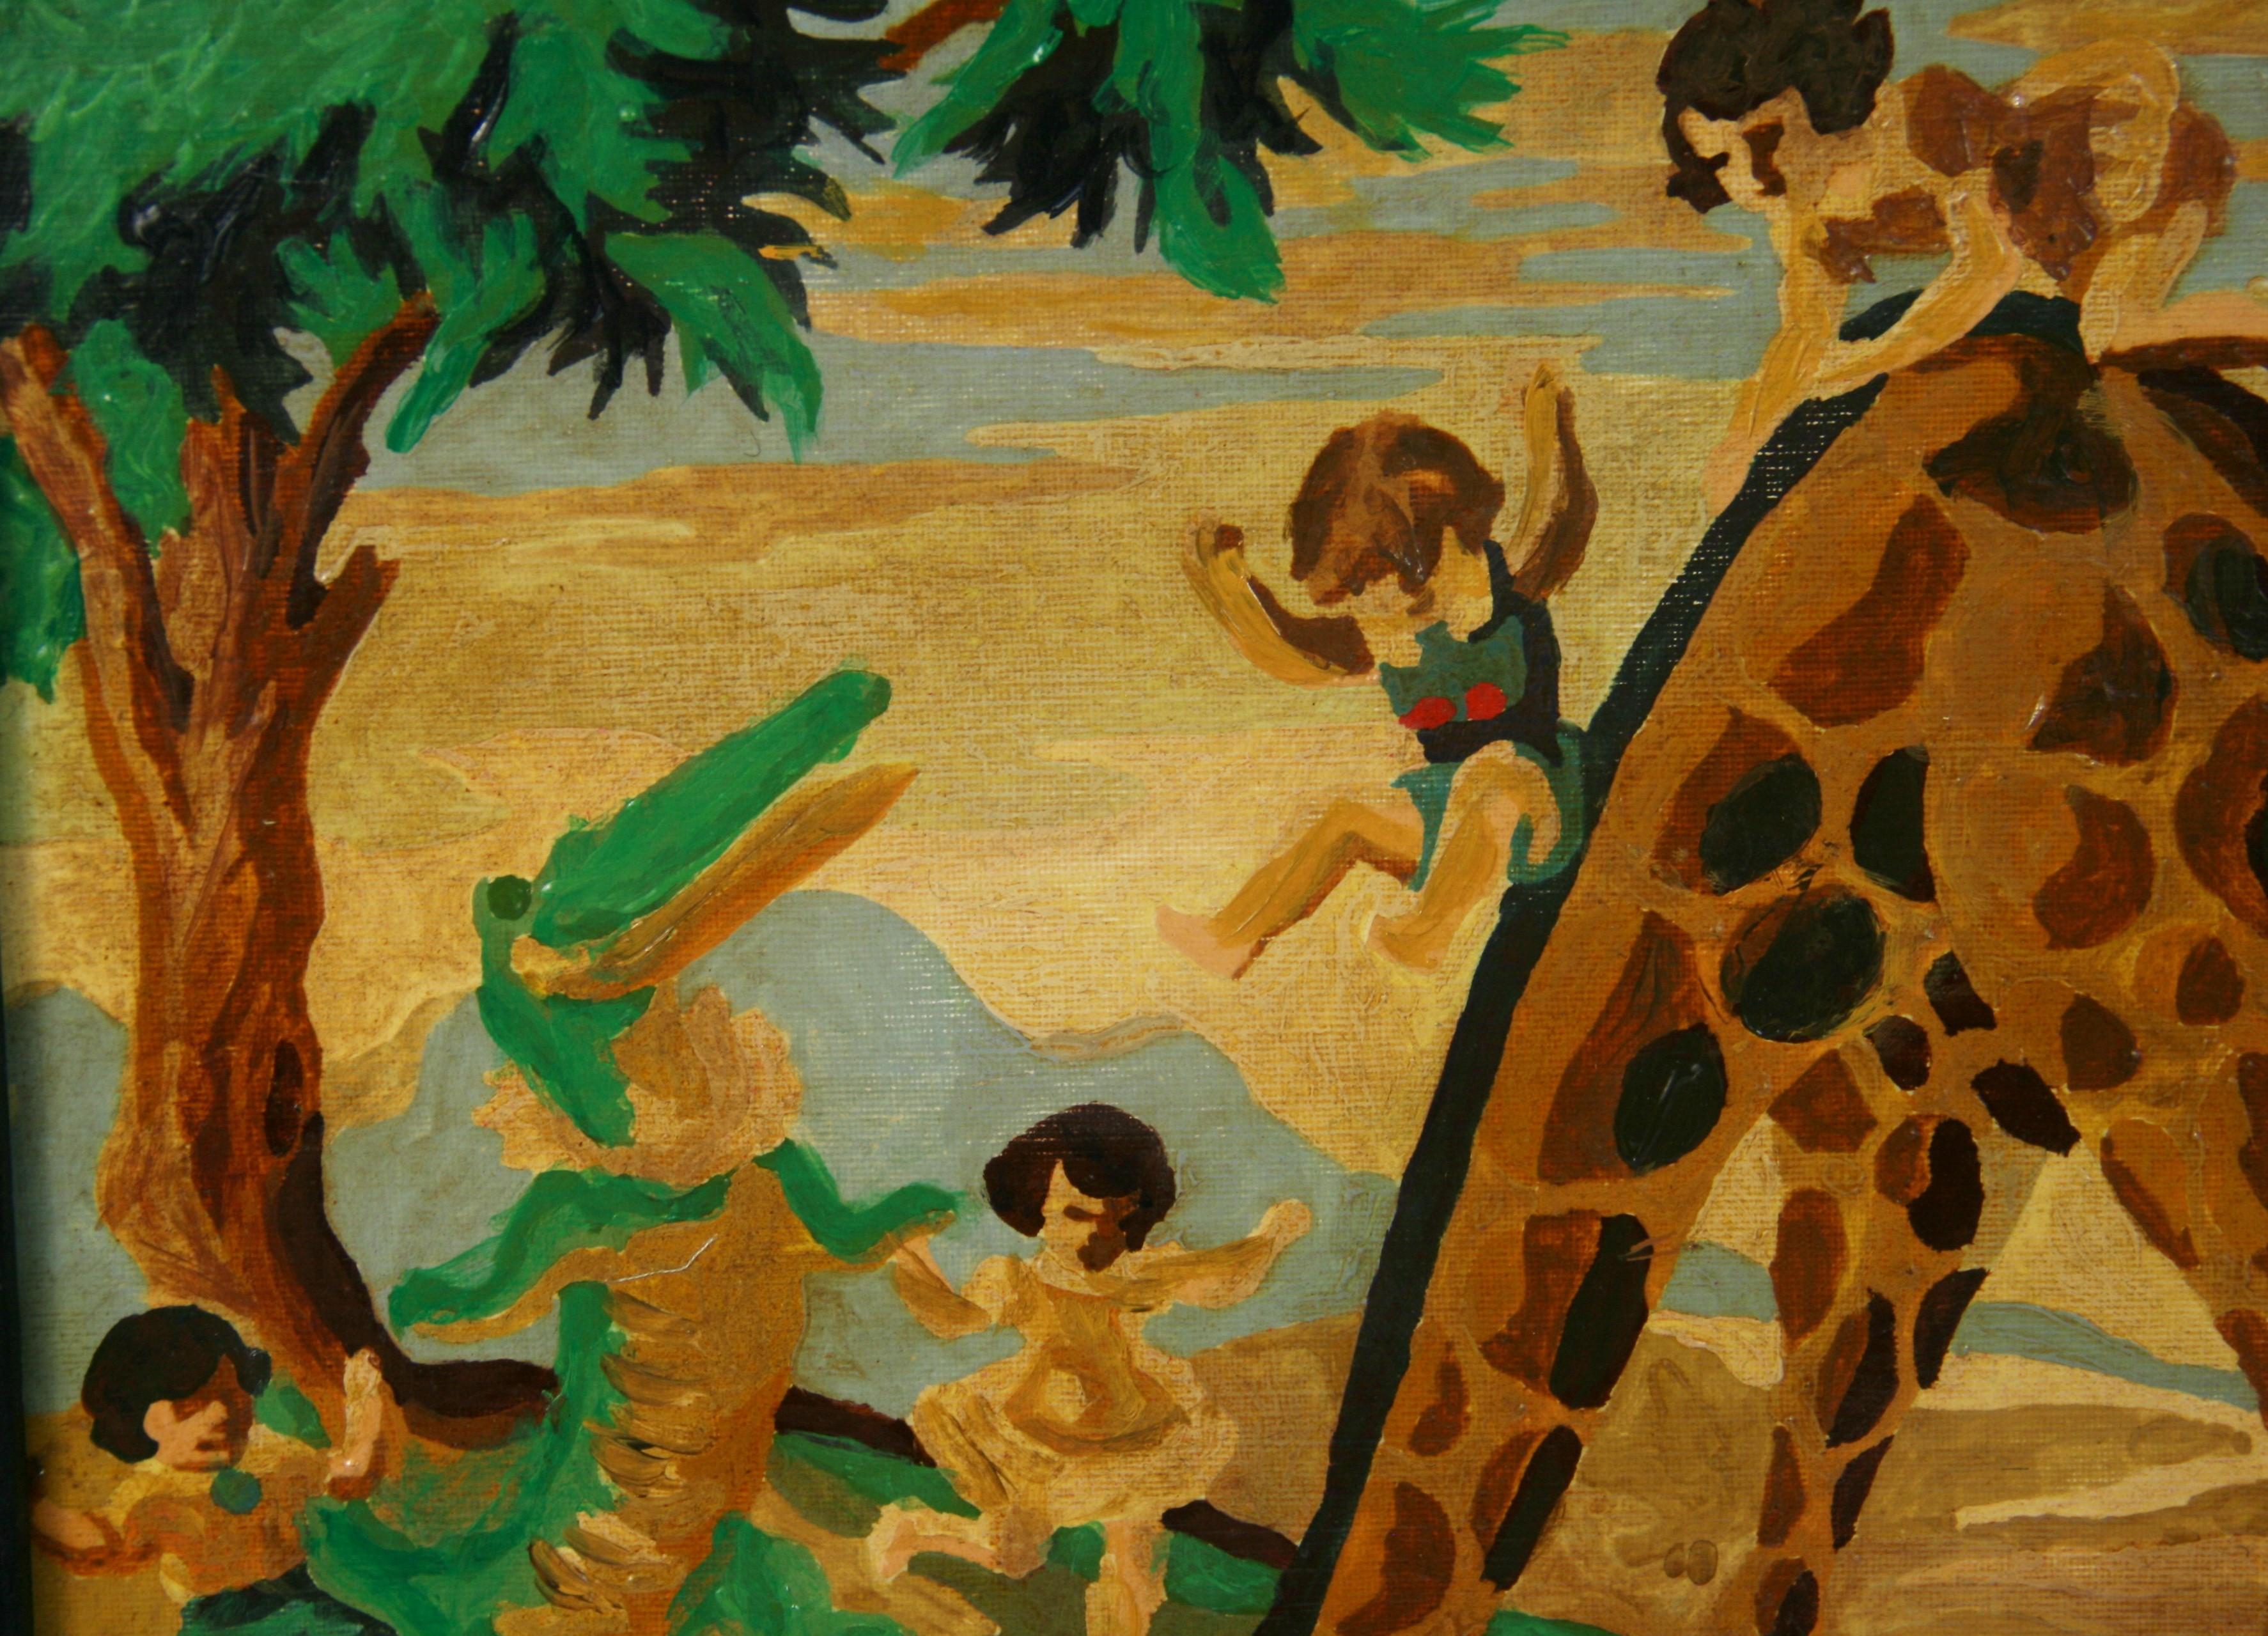 Riding a Giraffe Surreal  Oil Painting 1956 For Sale 10